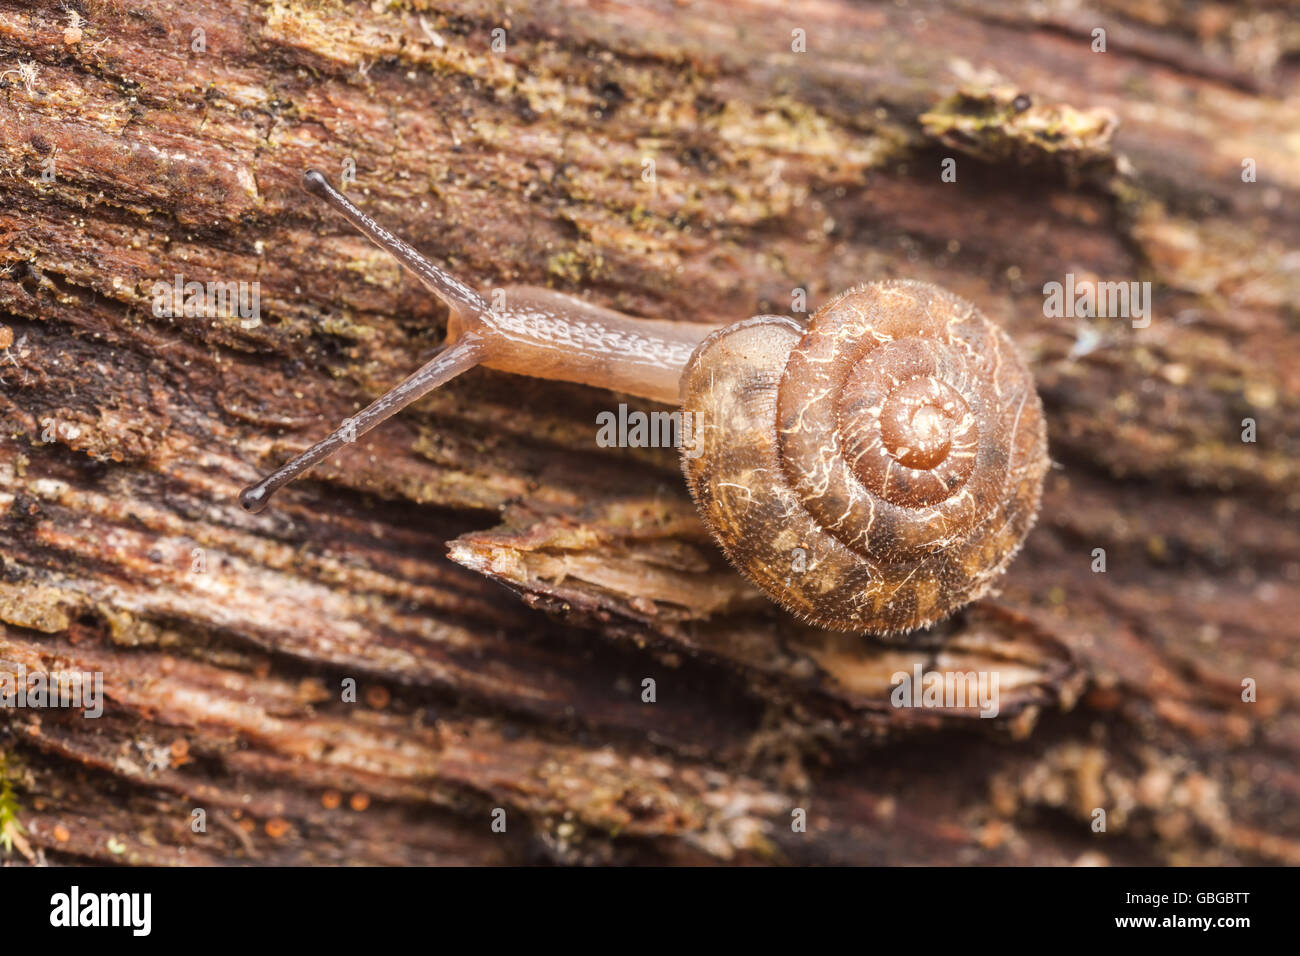 A Tigersnail (Anguispira sp.) moves slowly on the side of a fallen dead tree. Stock Photo